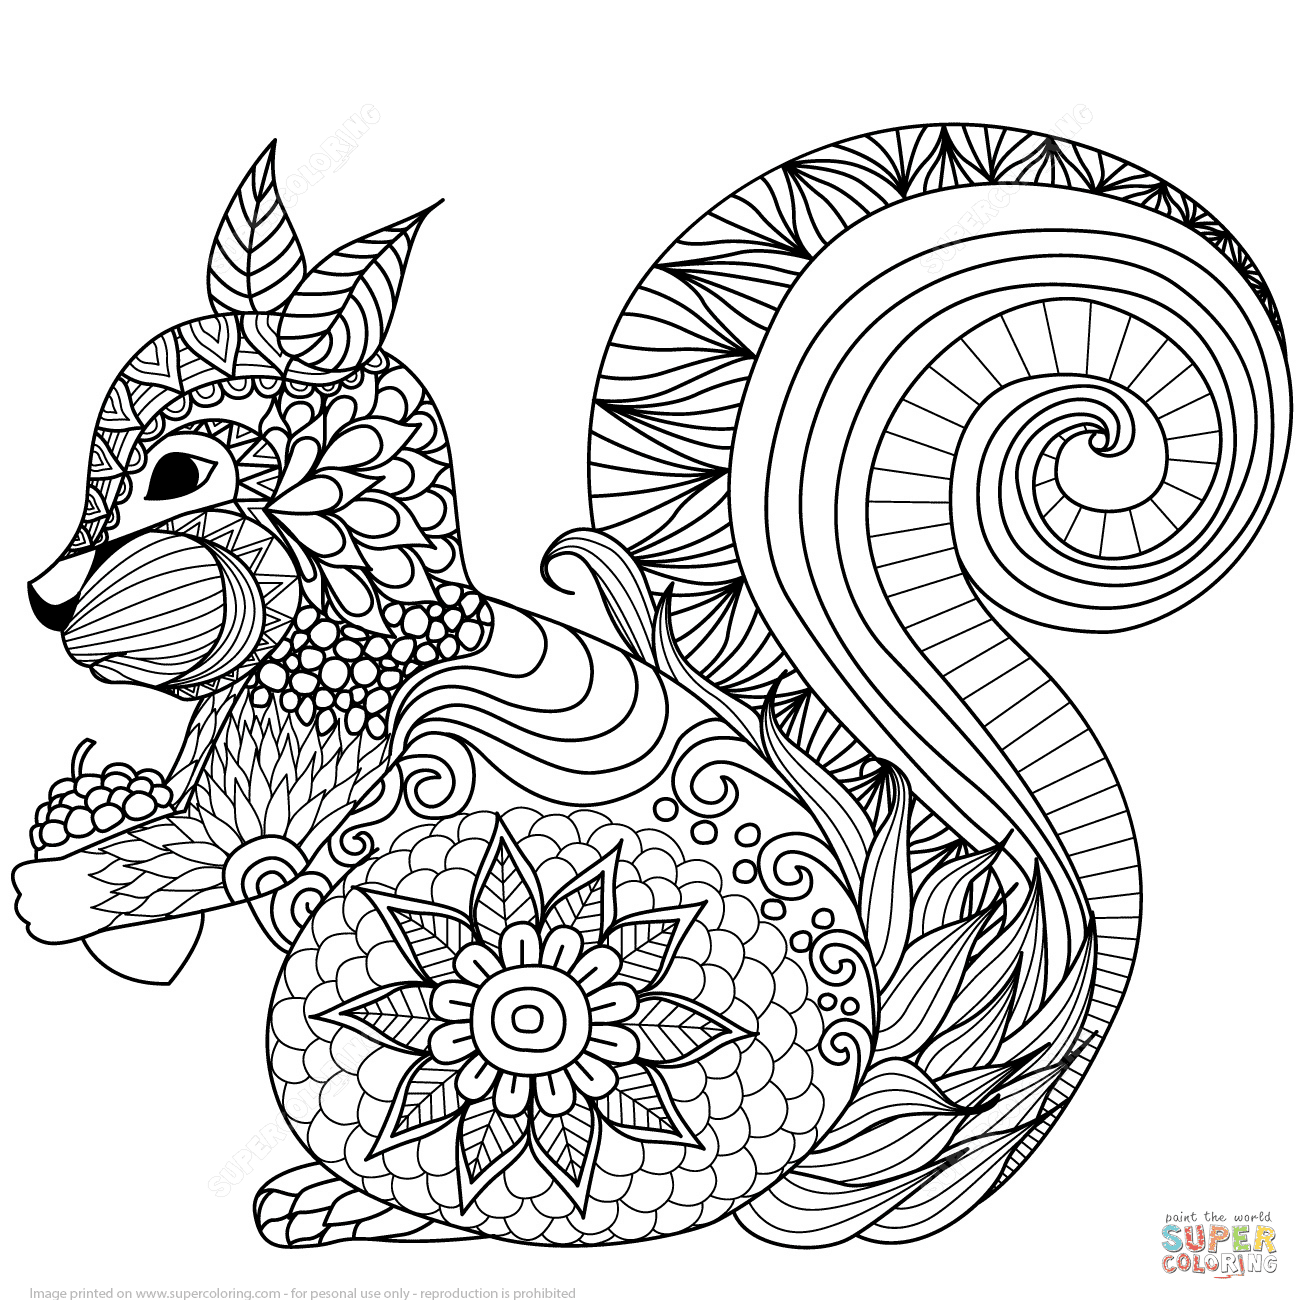 Download Free zen coloring pages for adults to download